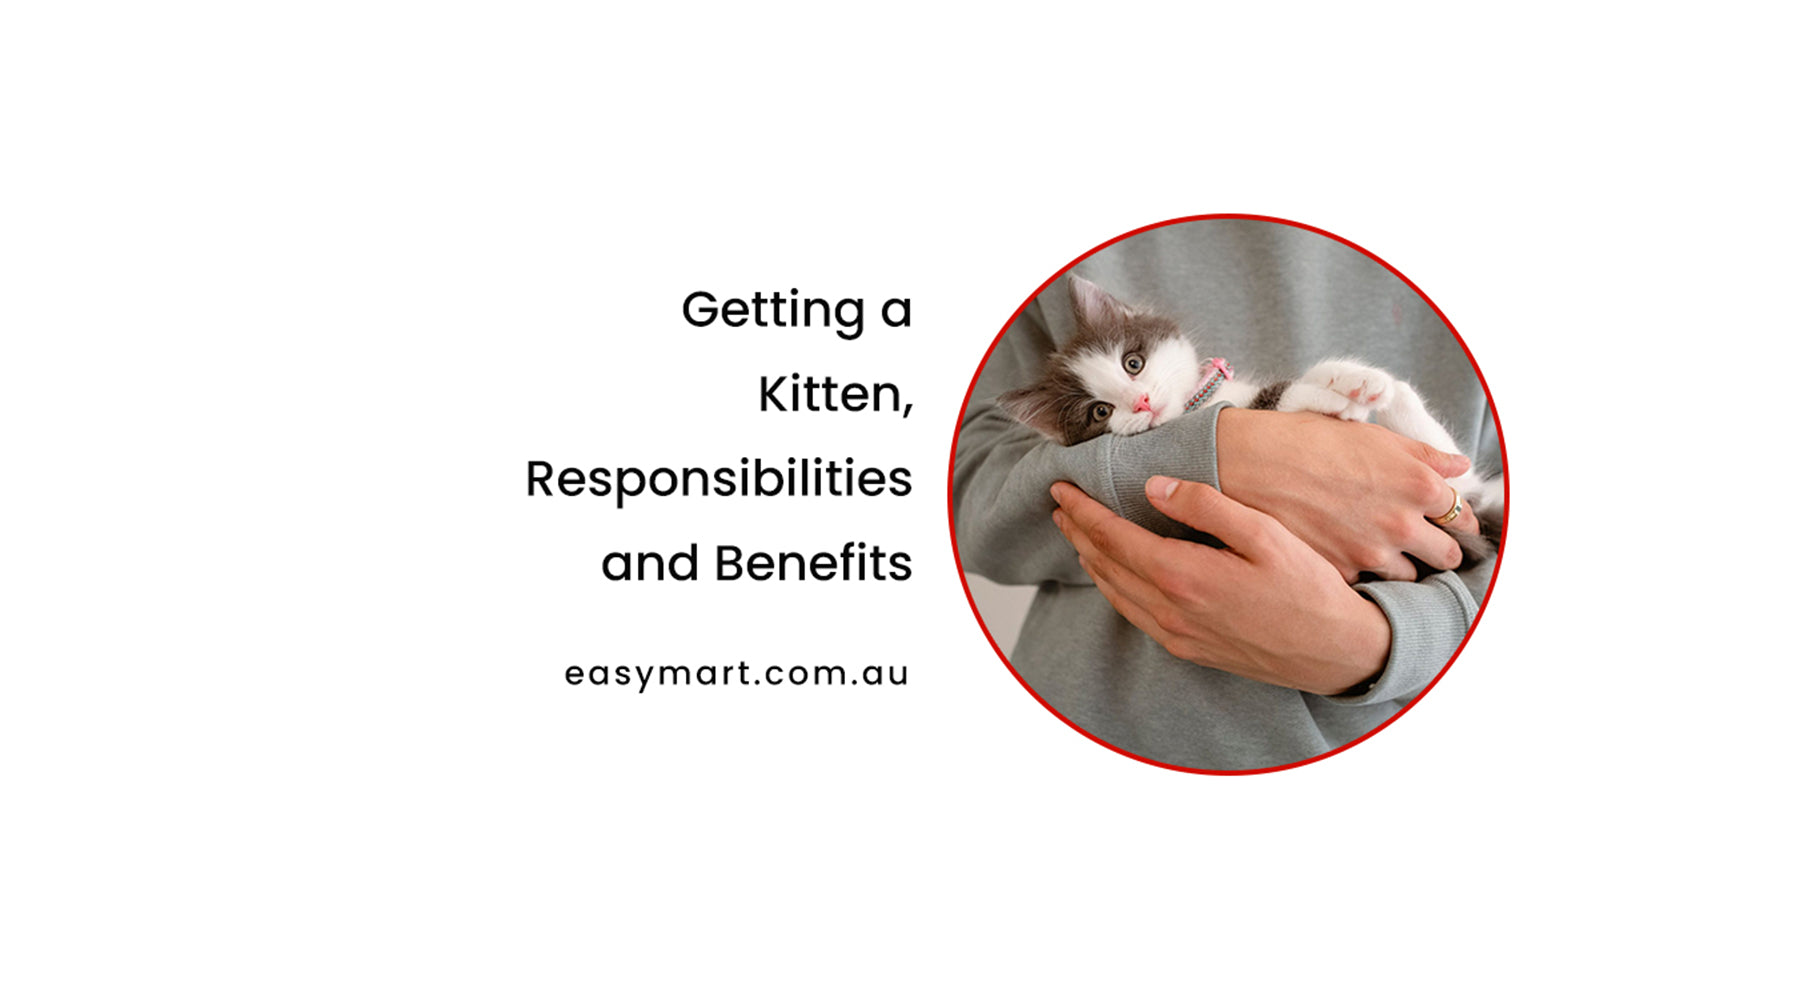 Getting a Kitten, Responsibilities and Benefits